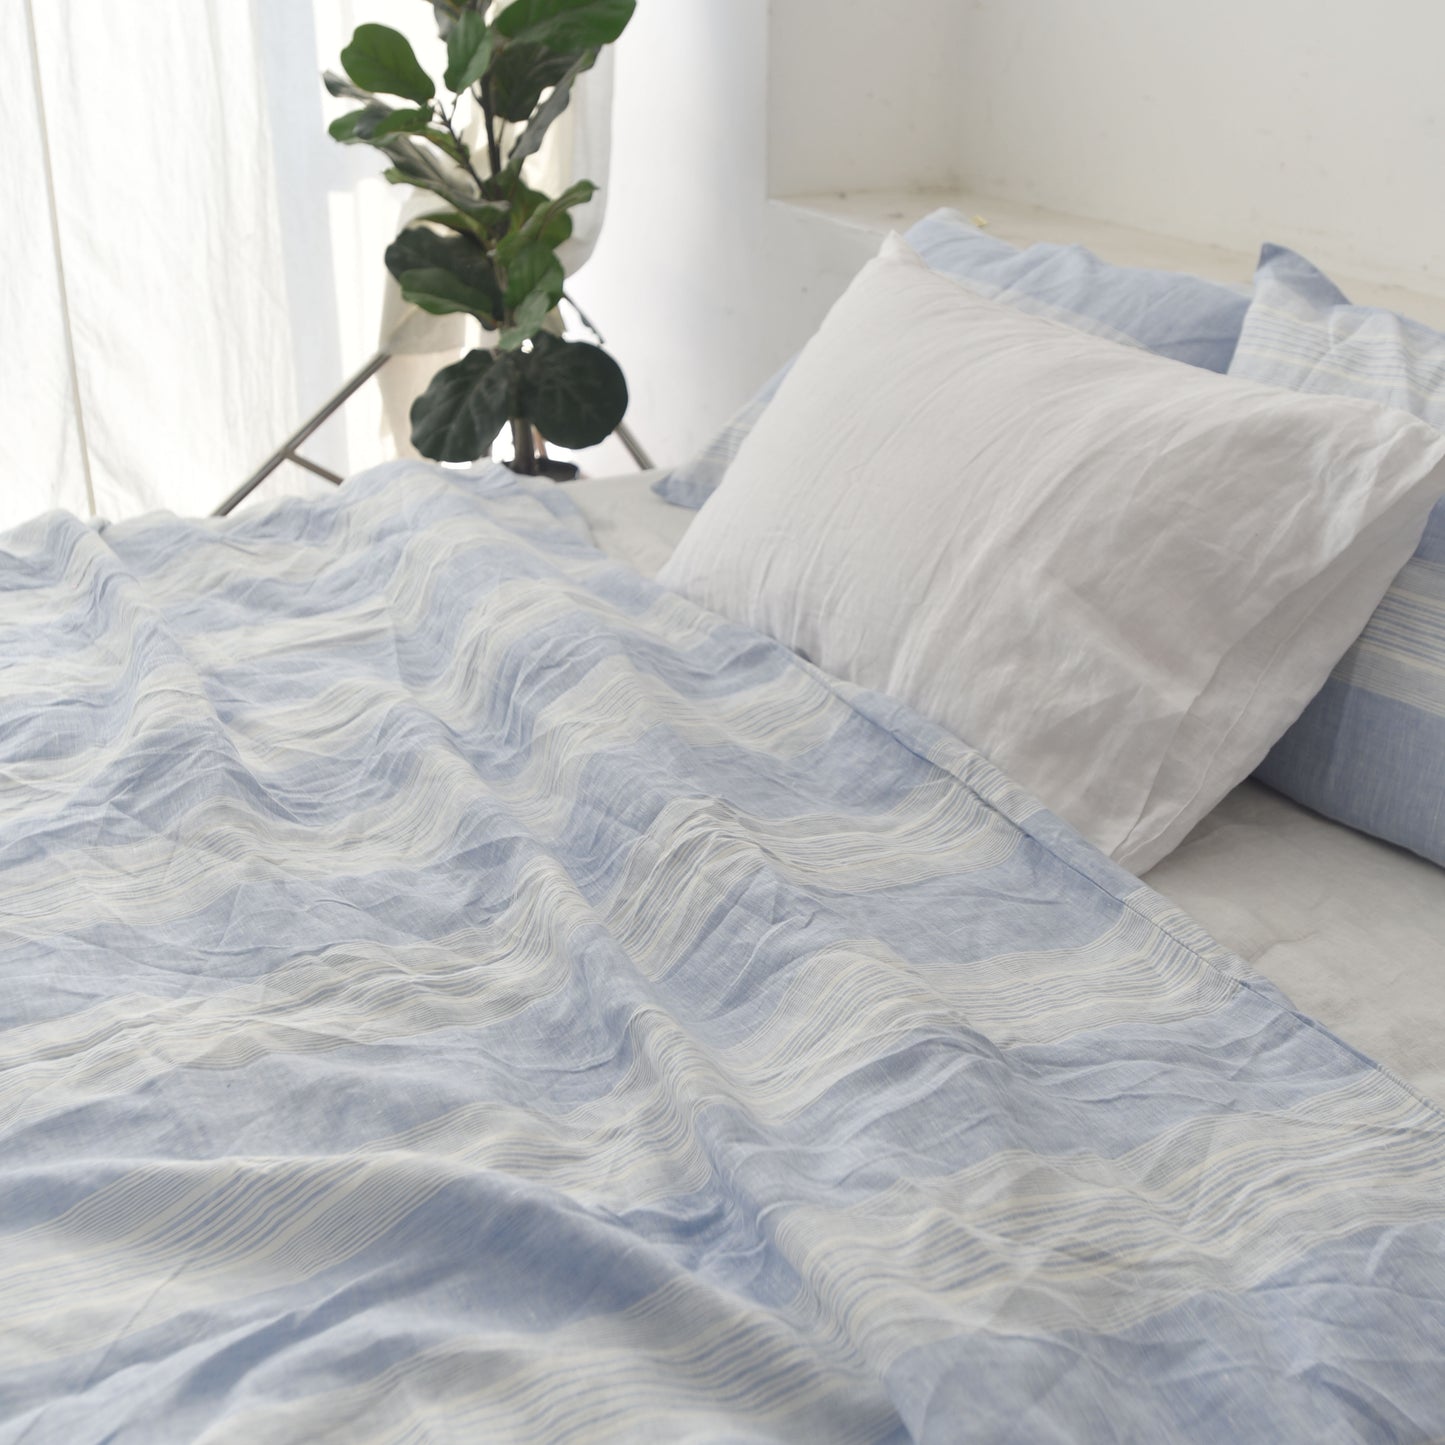 Blue Striped French Linen Bedding Sets (4 pieces)  - Yarn Dyeing